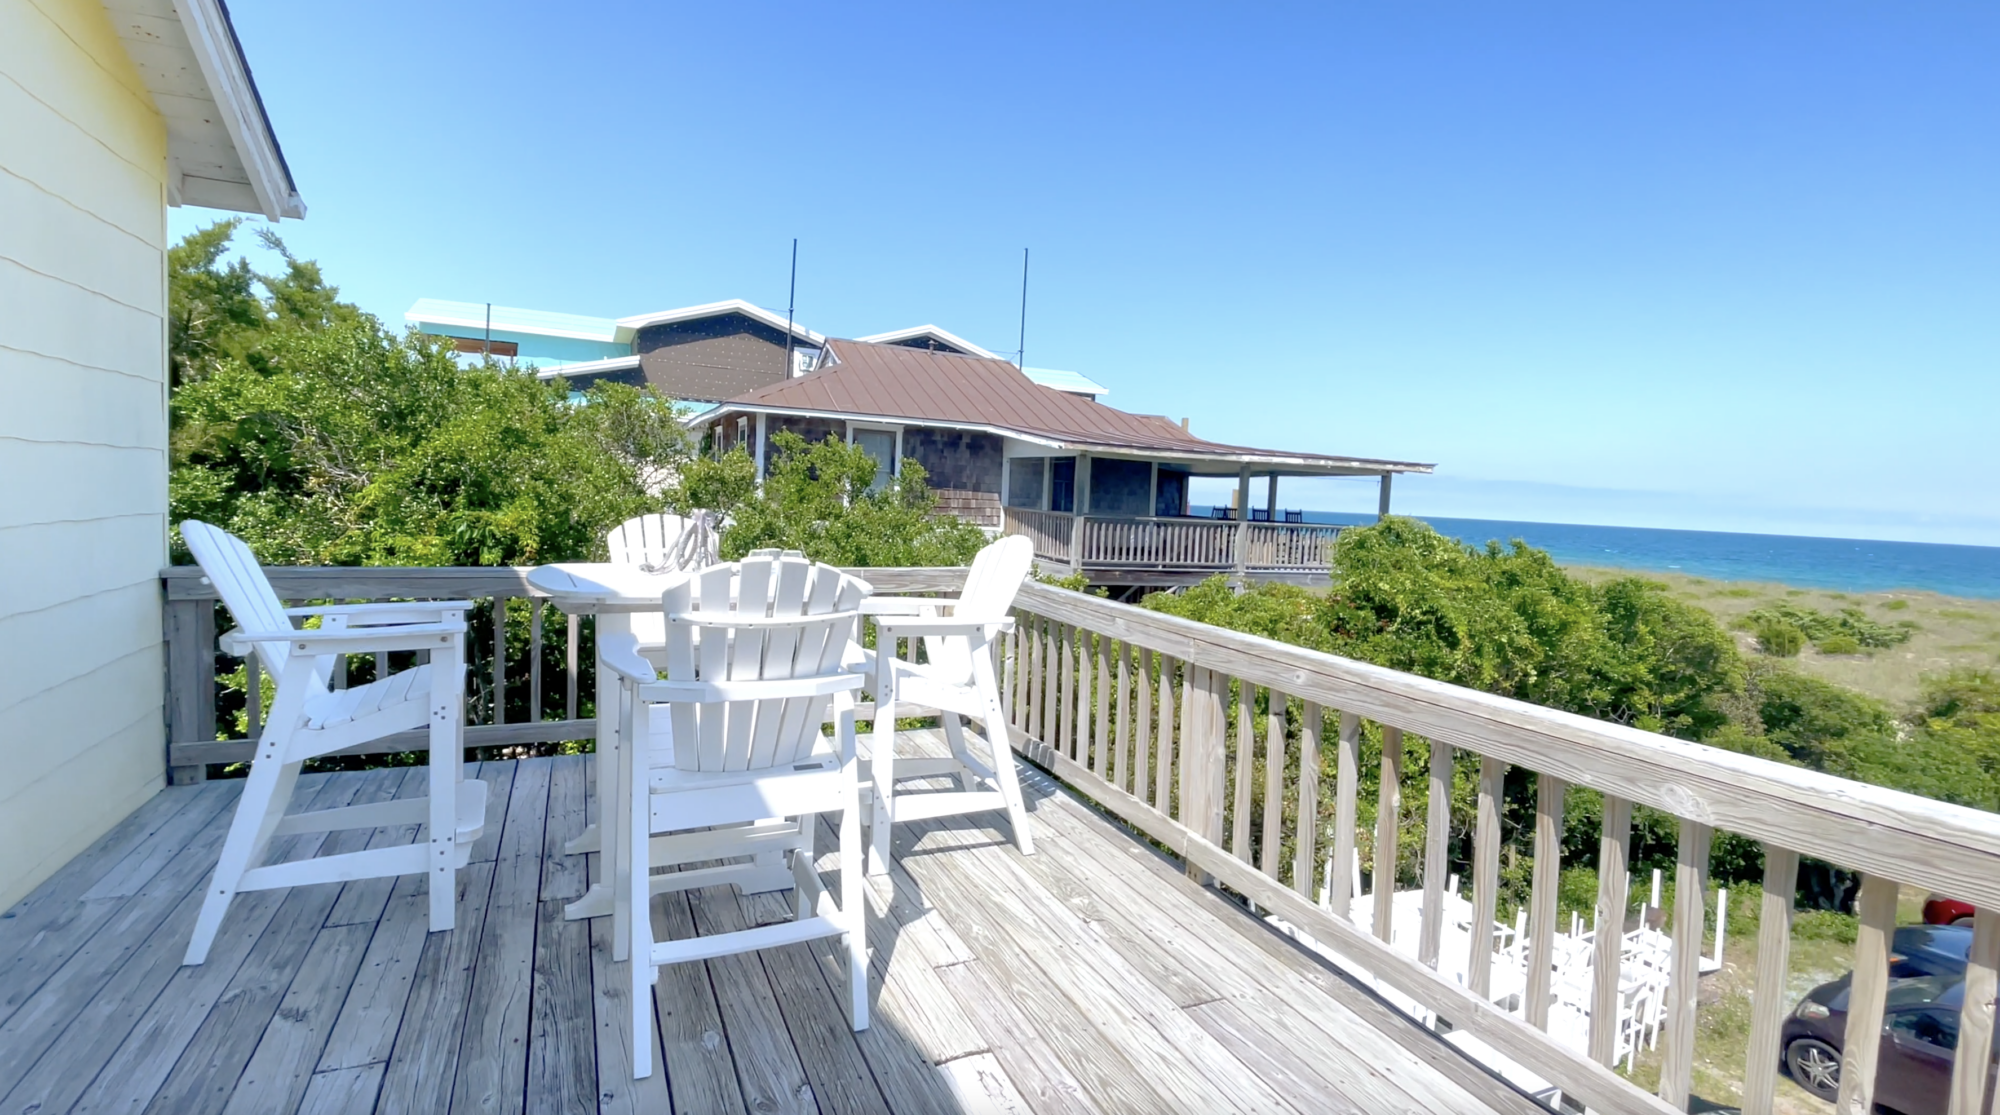 Oceanfront outdoor deck and seating area at Wrightsville Beach cottage at Blockade Runner.